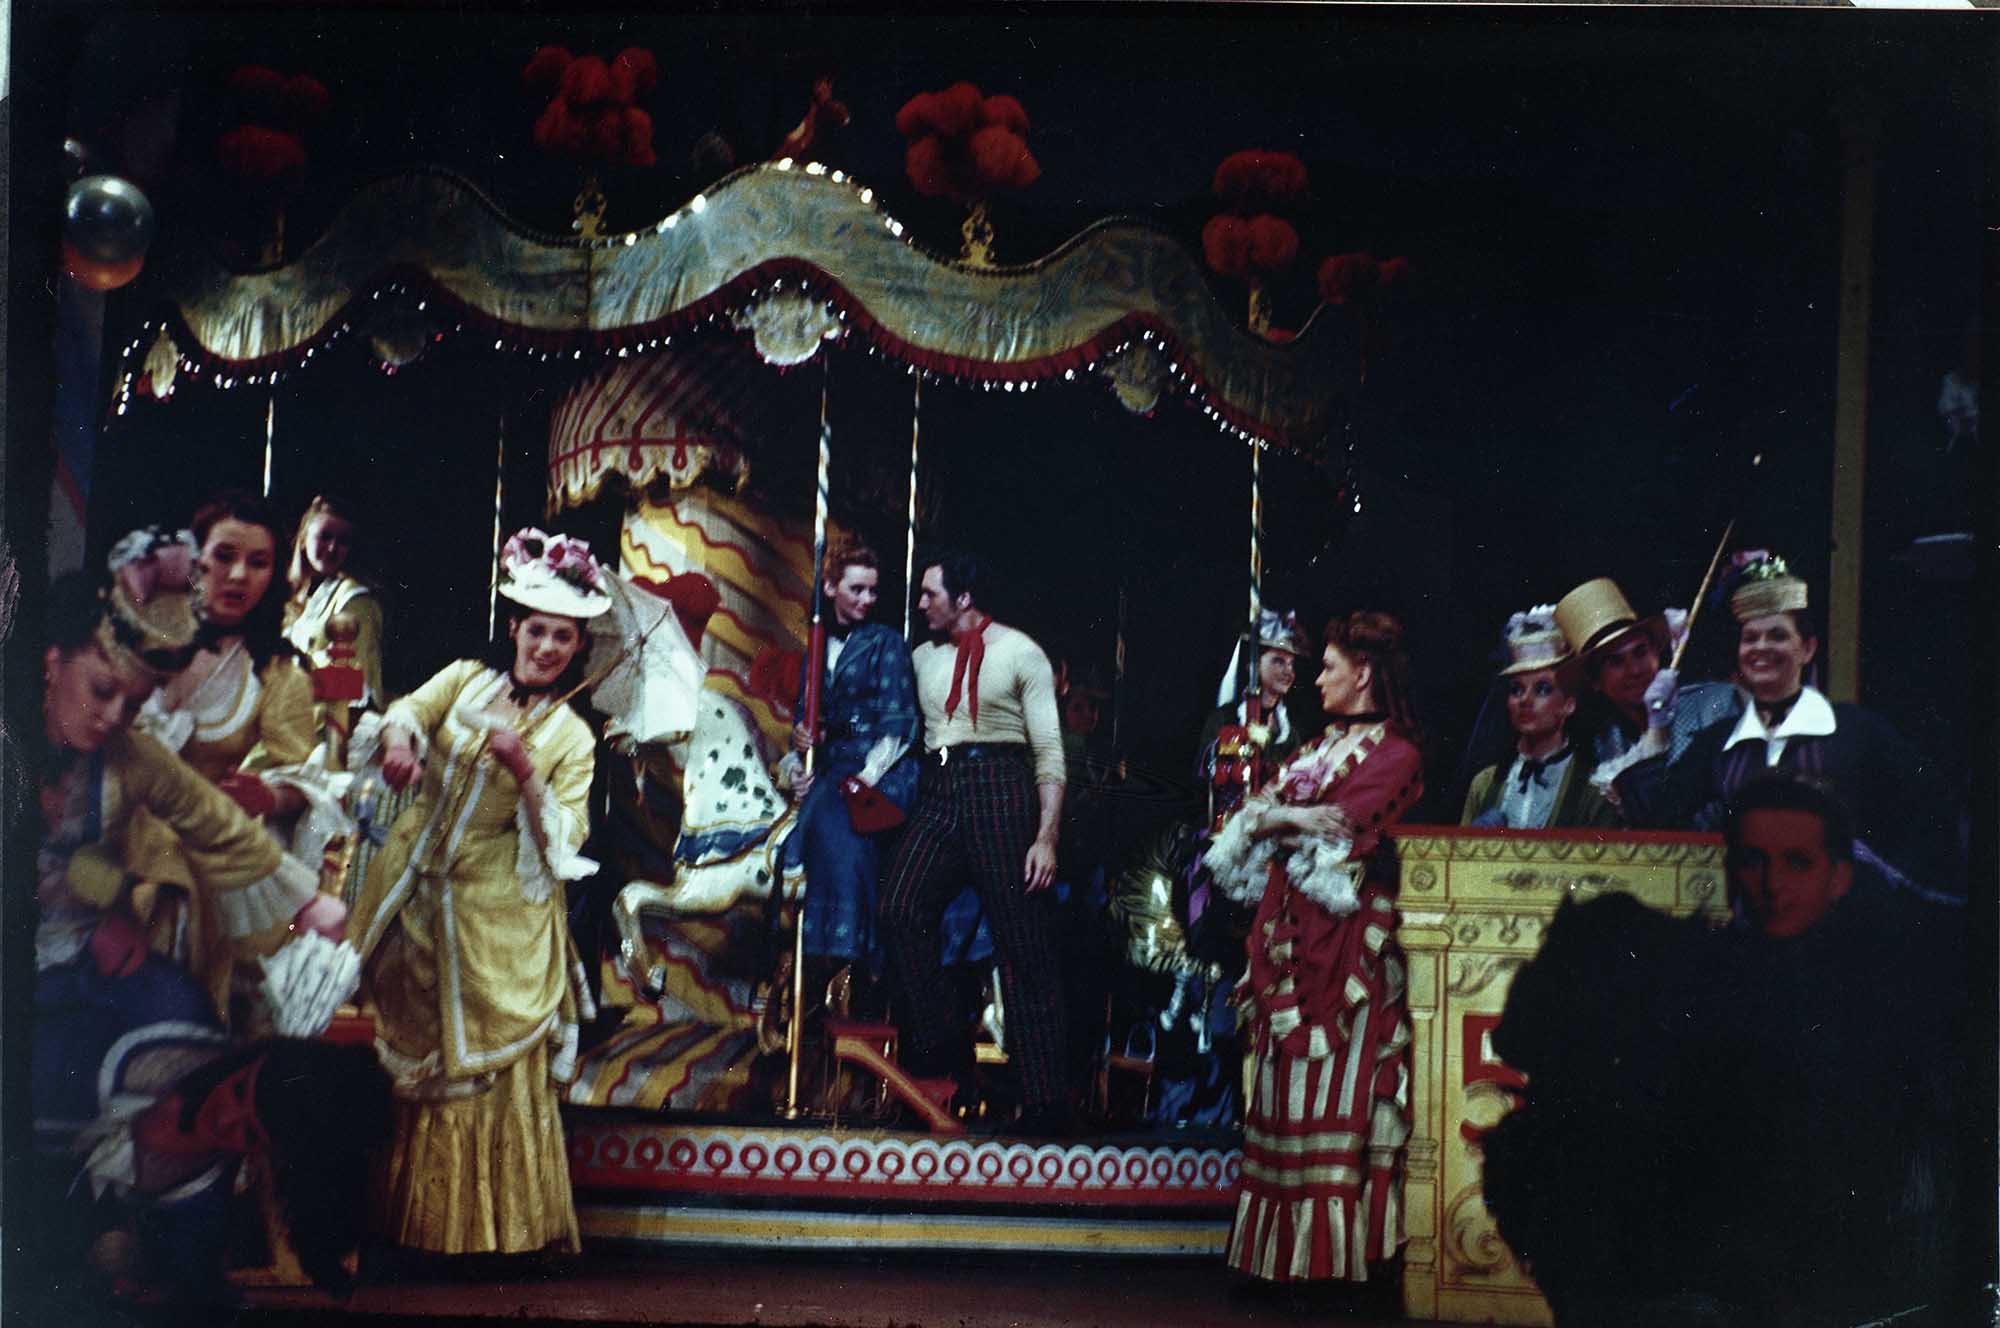 A photo from the 1945 Broadway production of Carousel.